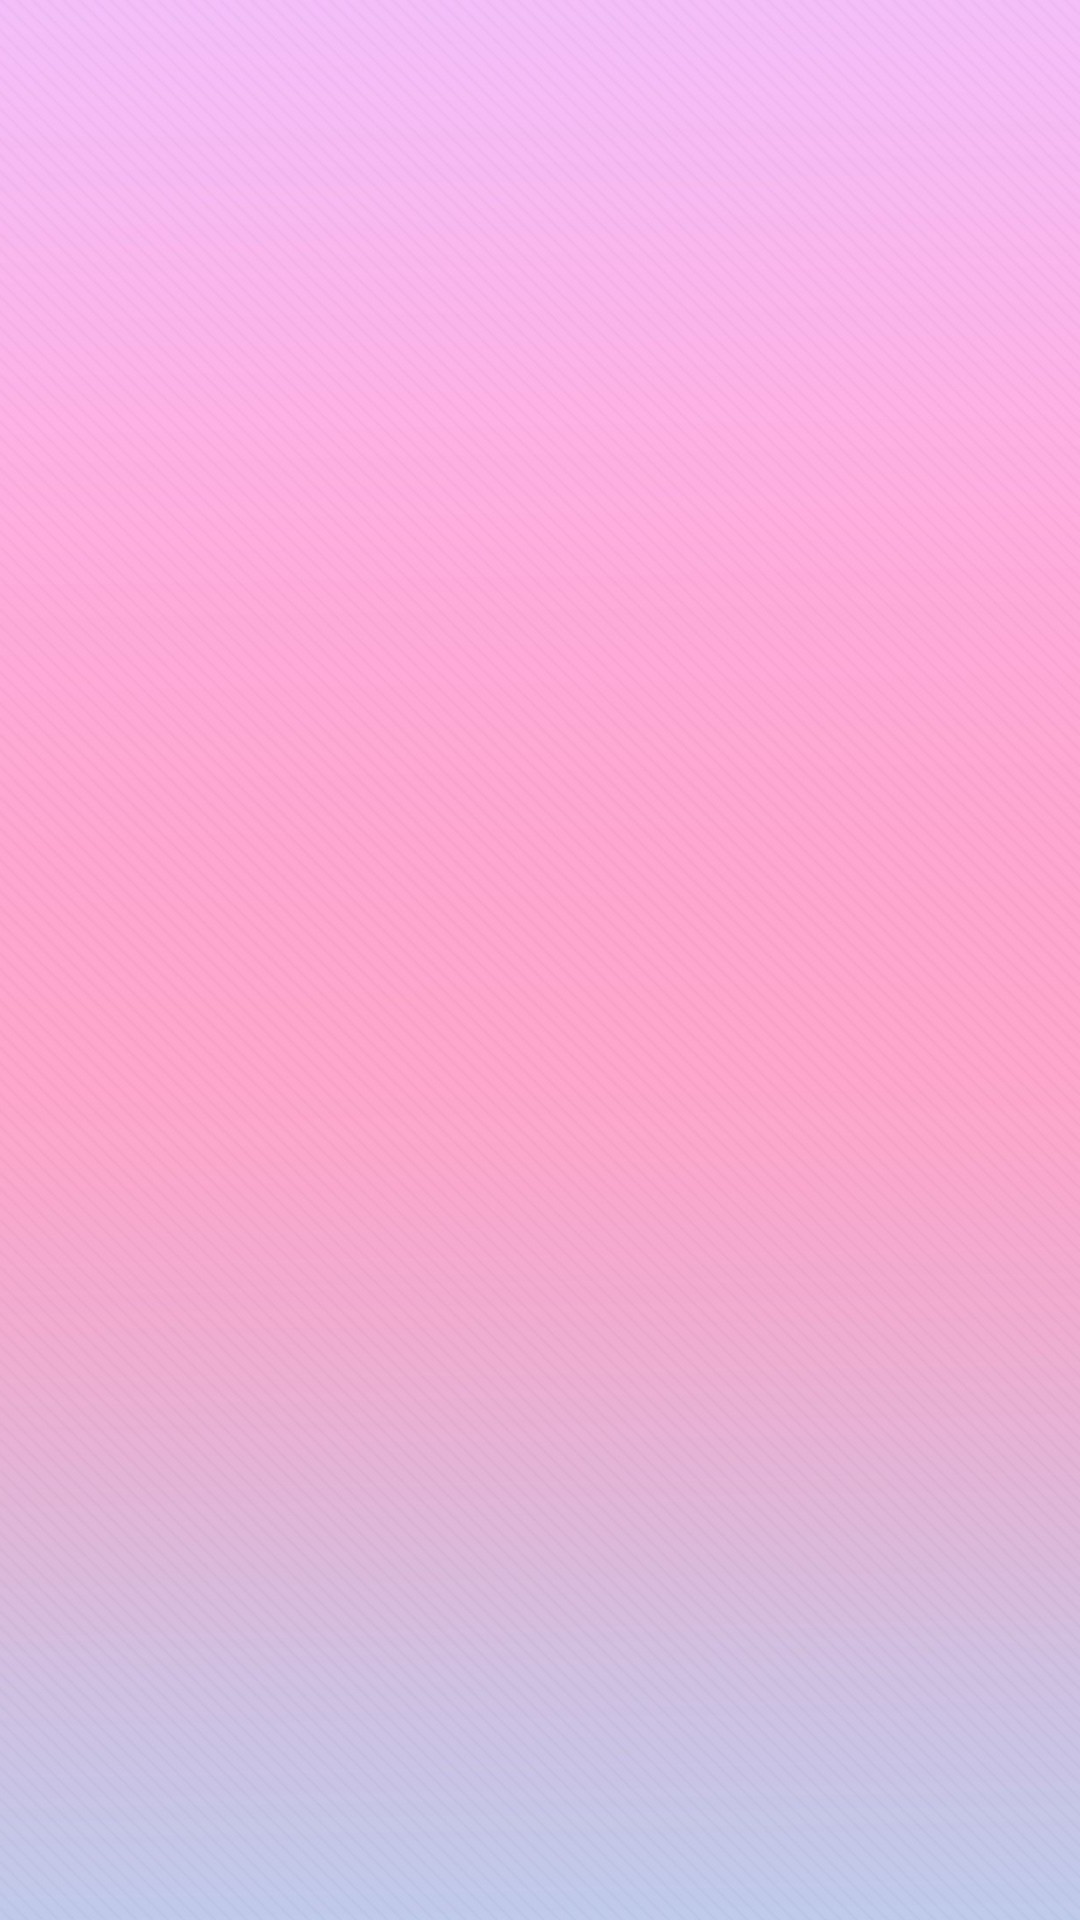 Computer Wallpapers Gradient with high-resolution 1080x1920 pixel. You can use this wallpaper for your Windows and Mac OS computers as well as your Android and iPhone smartphones